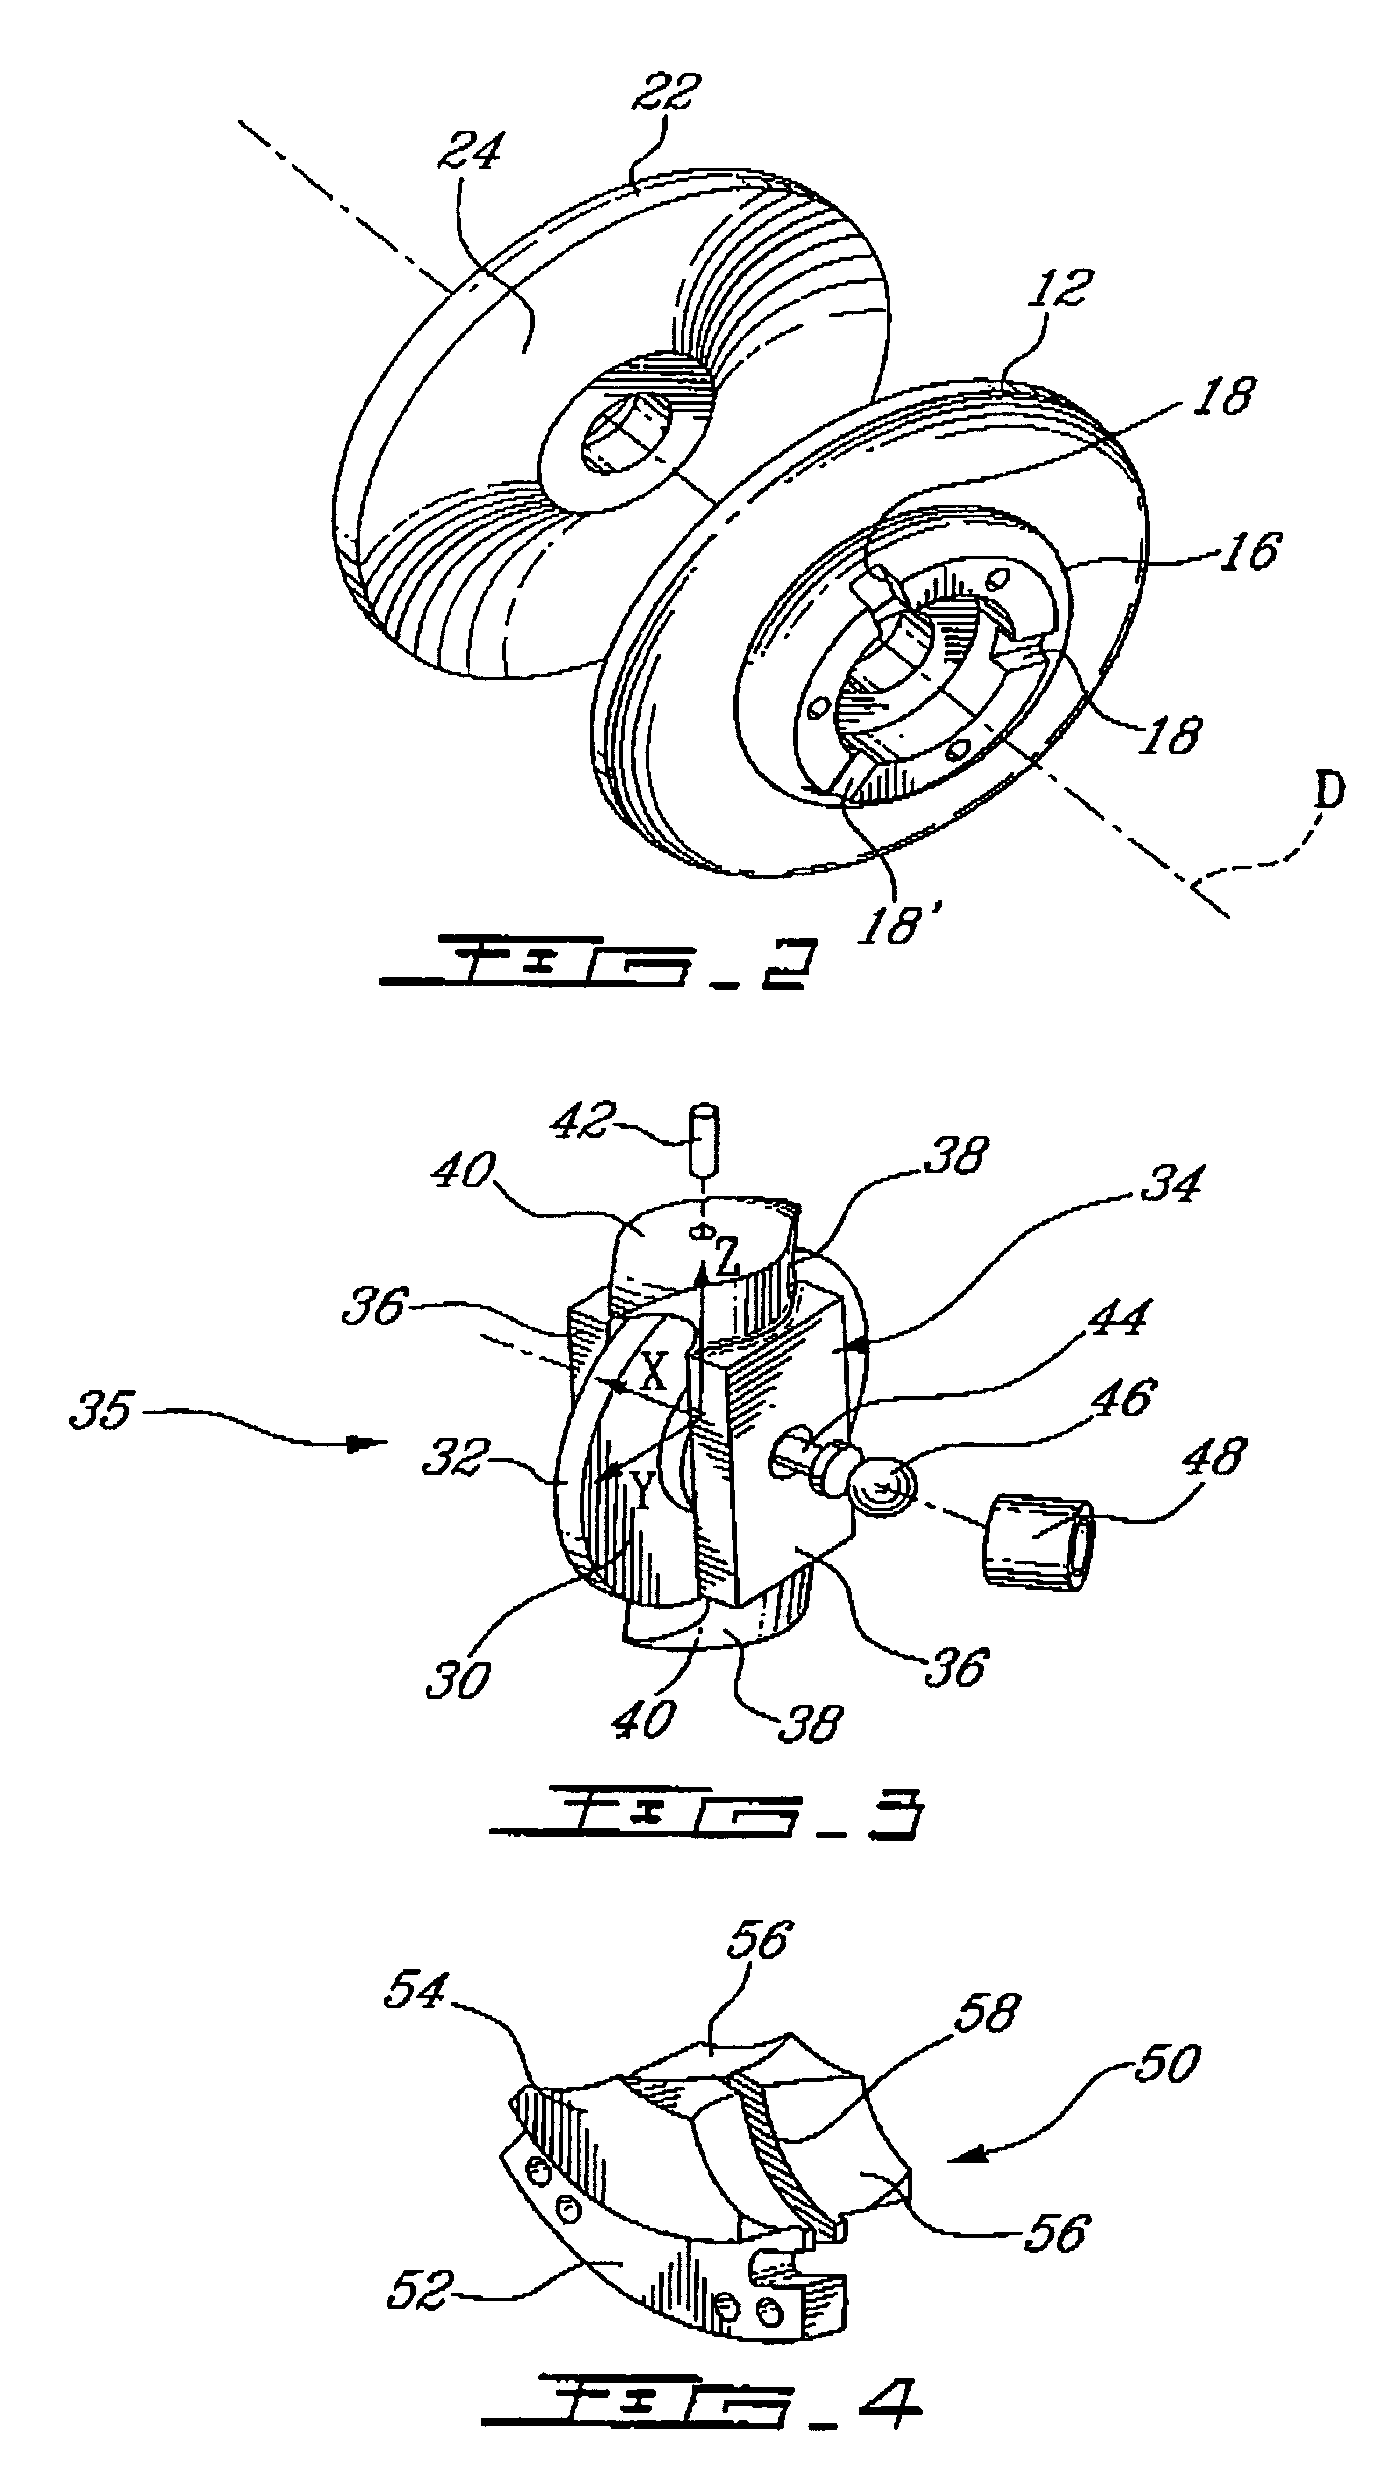 Drive roller control for toric-drive transmission